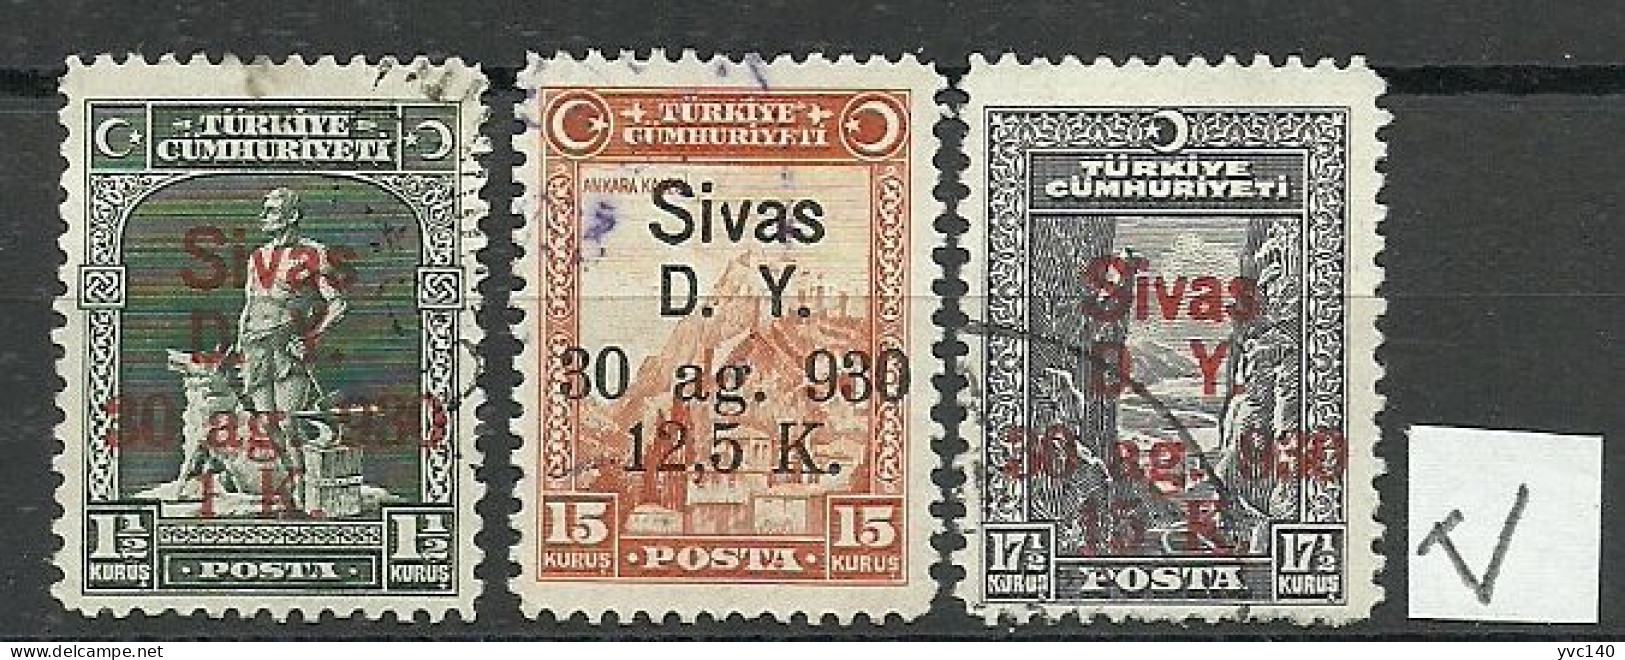 Turkey; 1930 Ankara-Sivas Railway Stamps ERROR "The Left Arm Of The Letter (V) Is Short" - Used Stamps